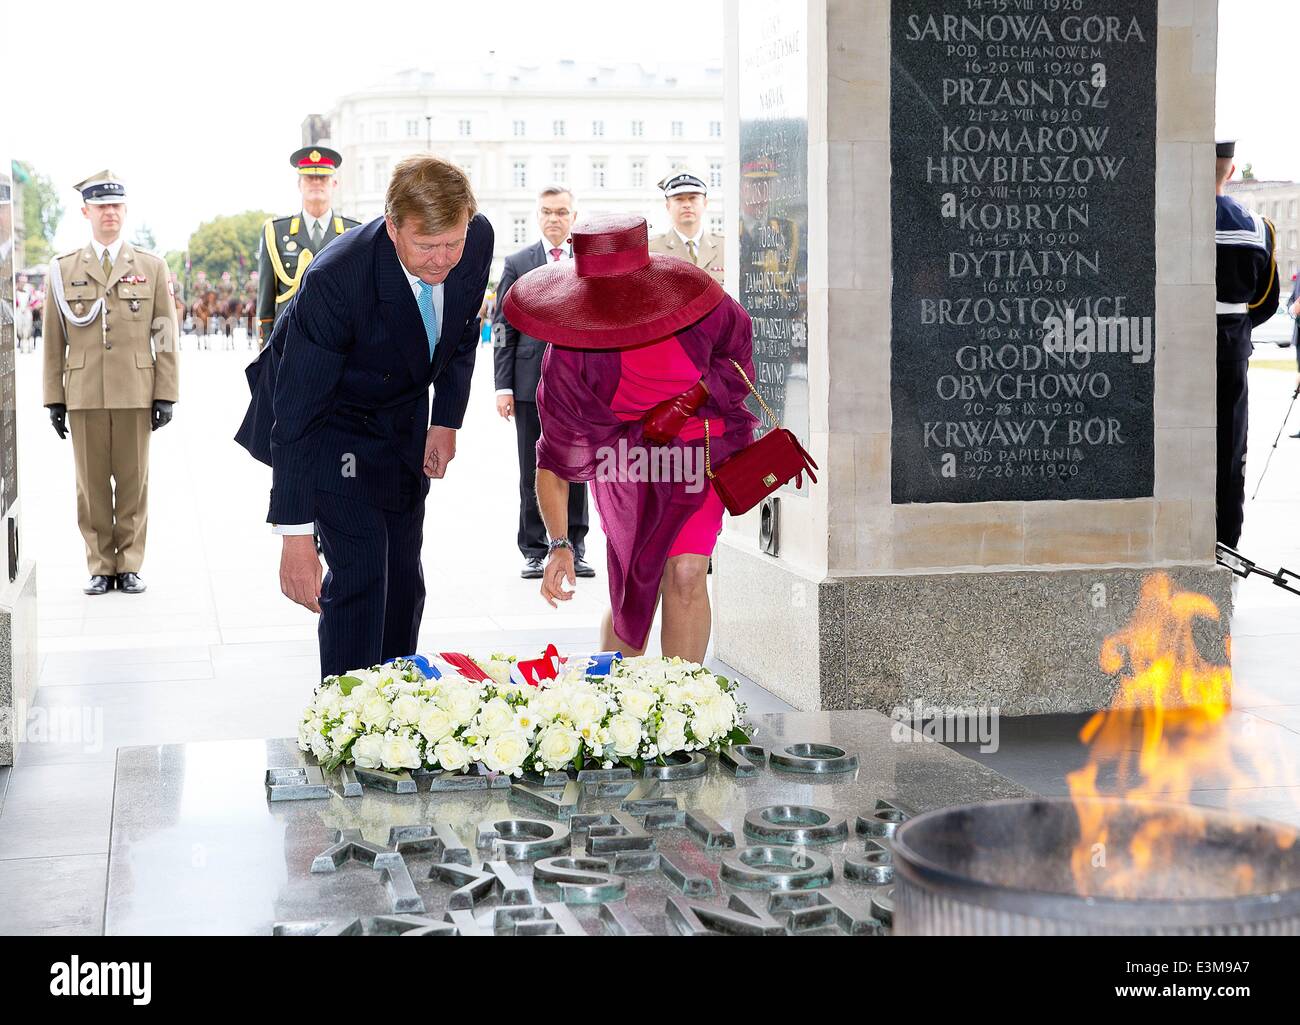 Warsaw, Poland. 24th June, 2014. King Willem-Alexander and Queen Maxima of the Netherlands at the Grave of the Unknown Soldier in Warsaw, Poland, 24 June 2014. The Dutch Royal couple is on a state visit to Poland. Photo: Albert Nieboer/RPE//DPA -NO WIRE SERVICE-/dpa/Alamy Live News Stock Photo